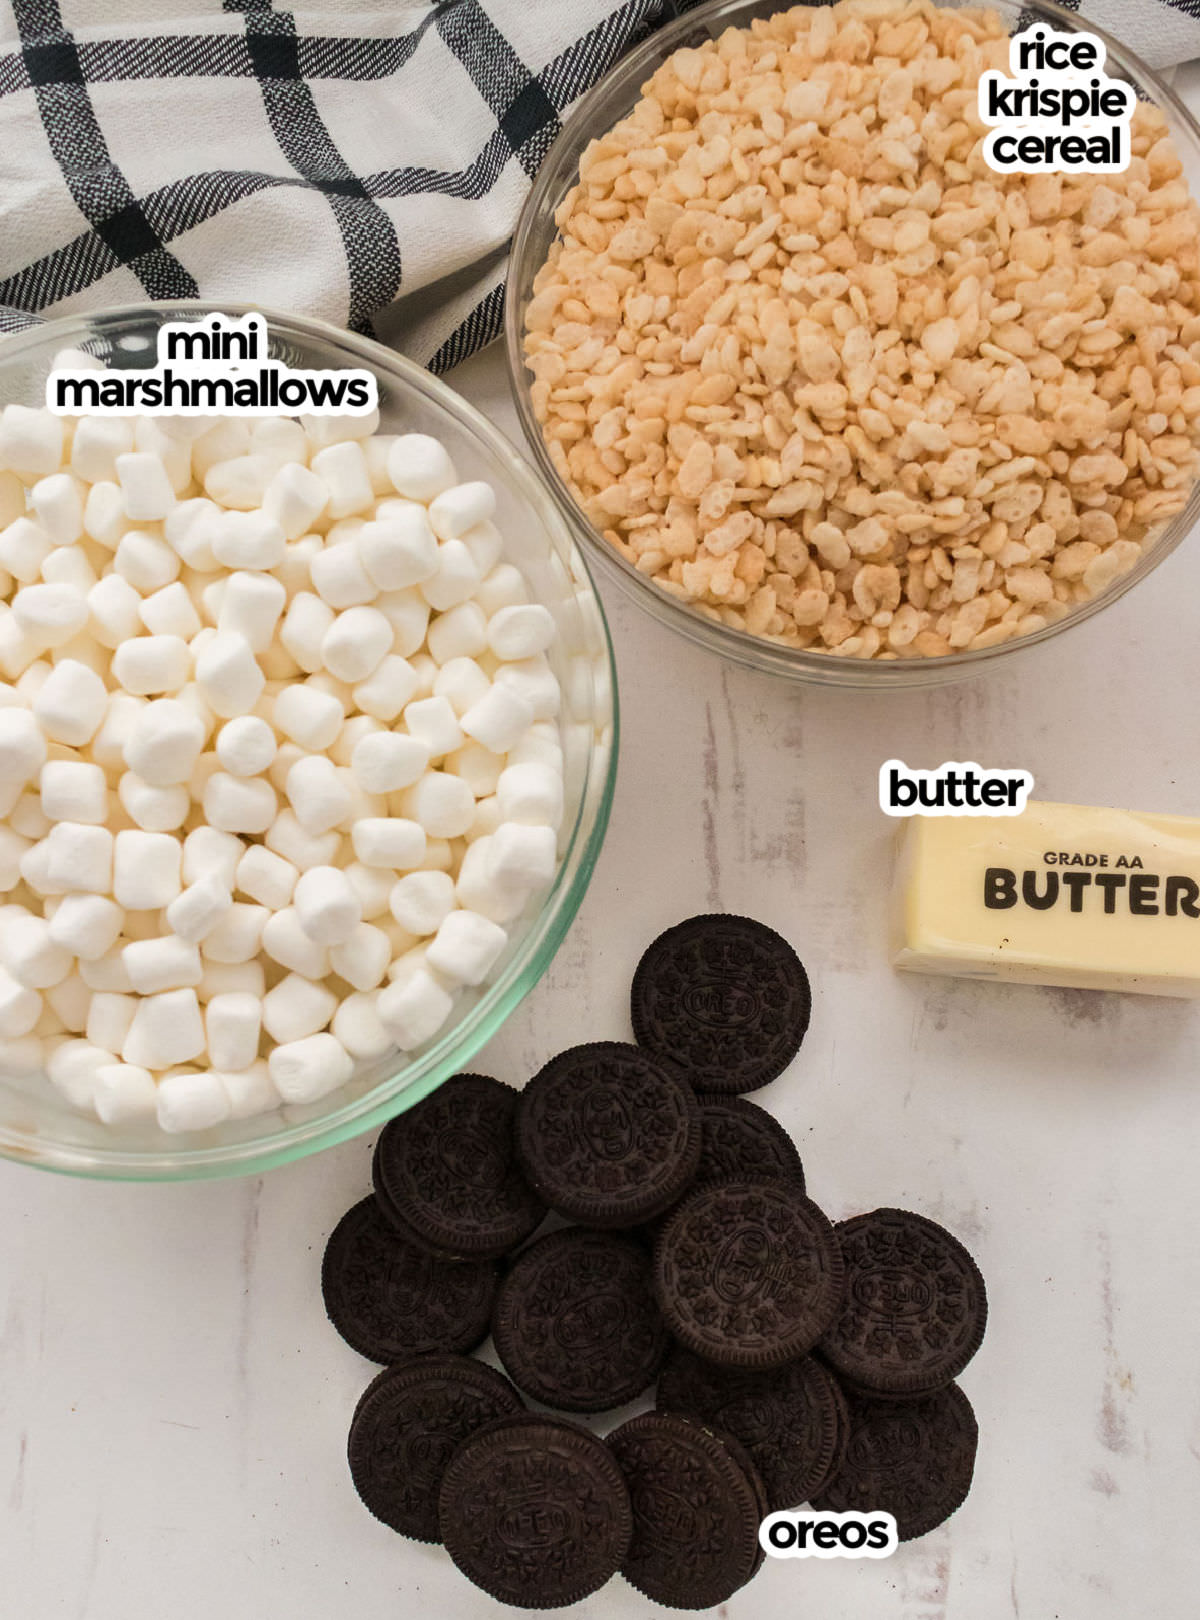 All the ingredients you will need to make Oreo Rice Krispie Treats including Mini Marshmallows, Rice Krispie Cereal, Butter and Oreo Cookies.